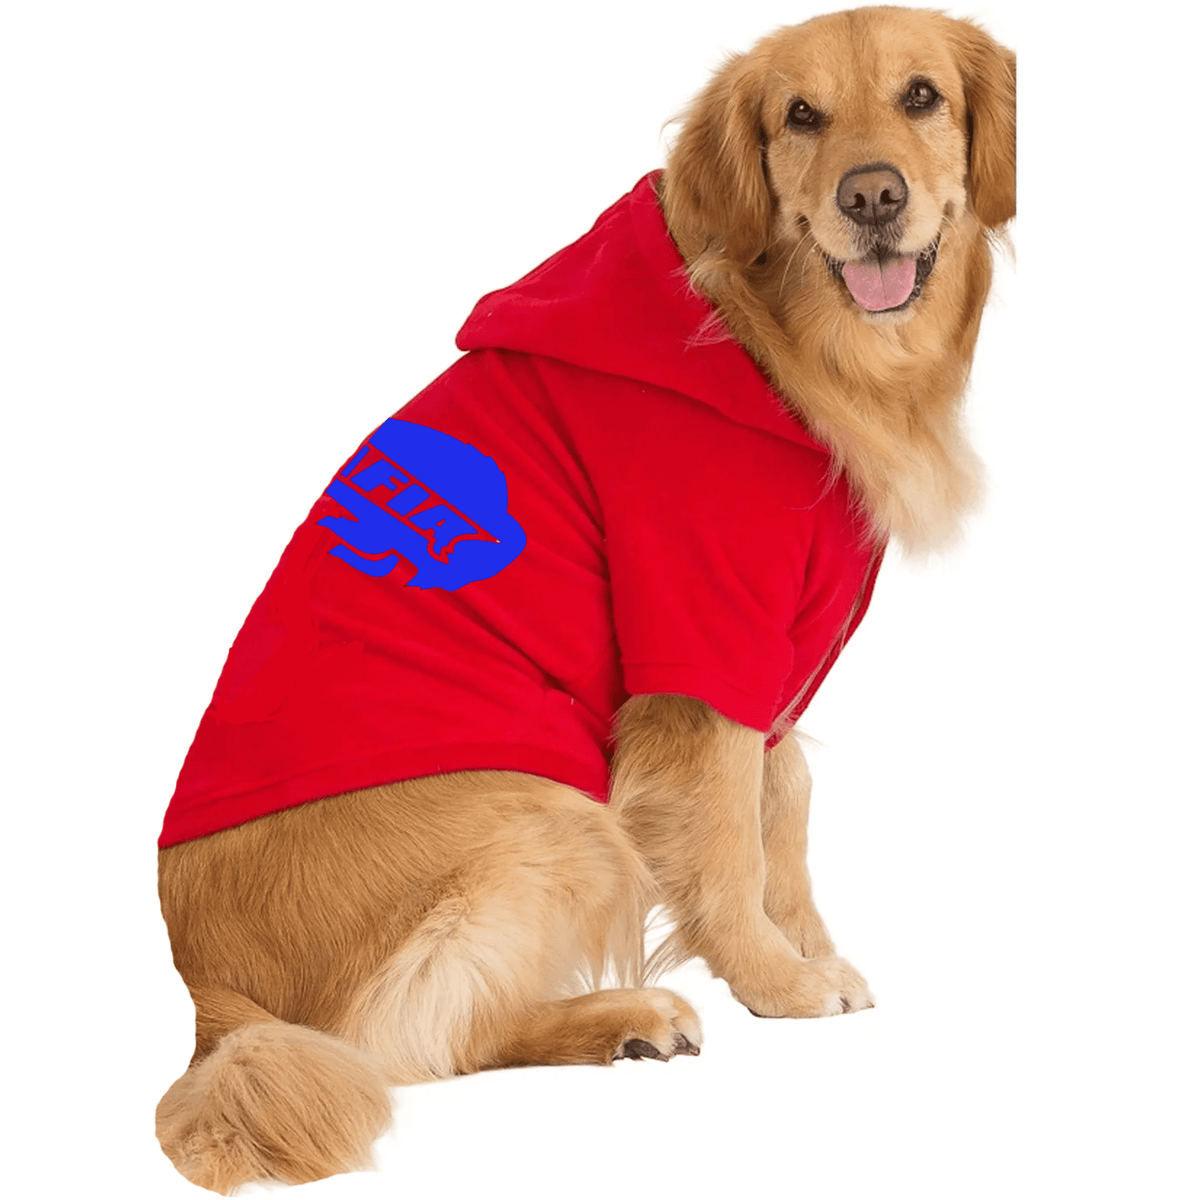 Pets First MLB Hoodie for Dogs & Cats - LA Angels Dog Hooded T-Shirt,  Small. - MLB Team Color Hoody